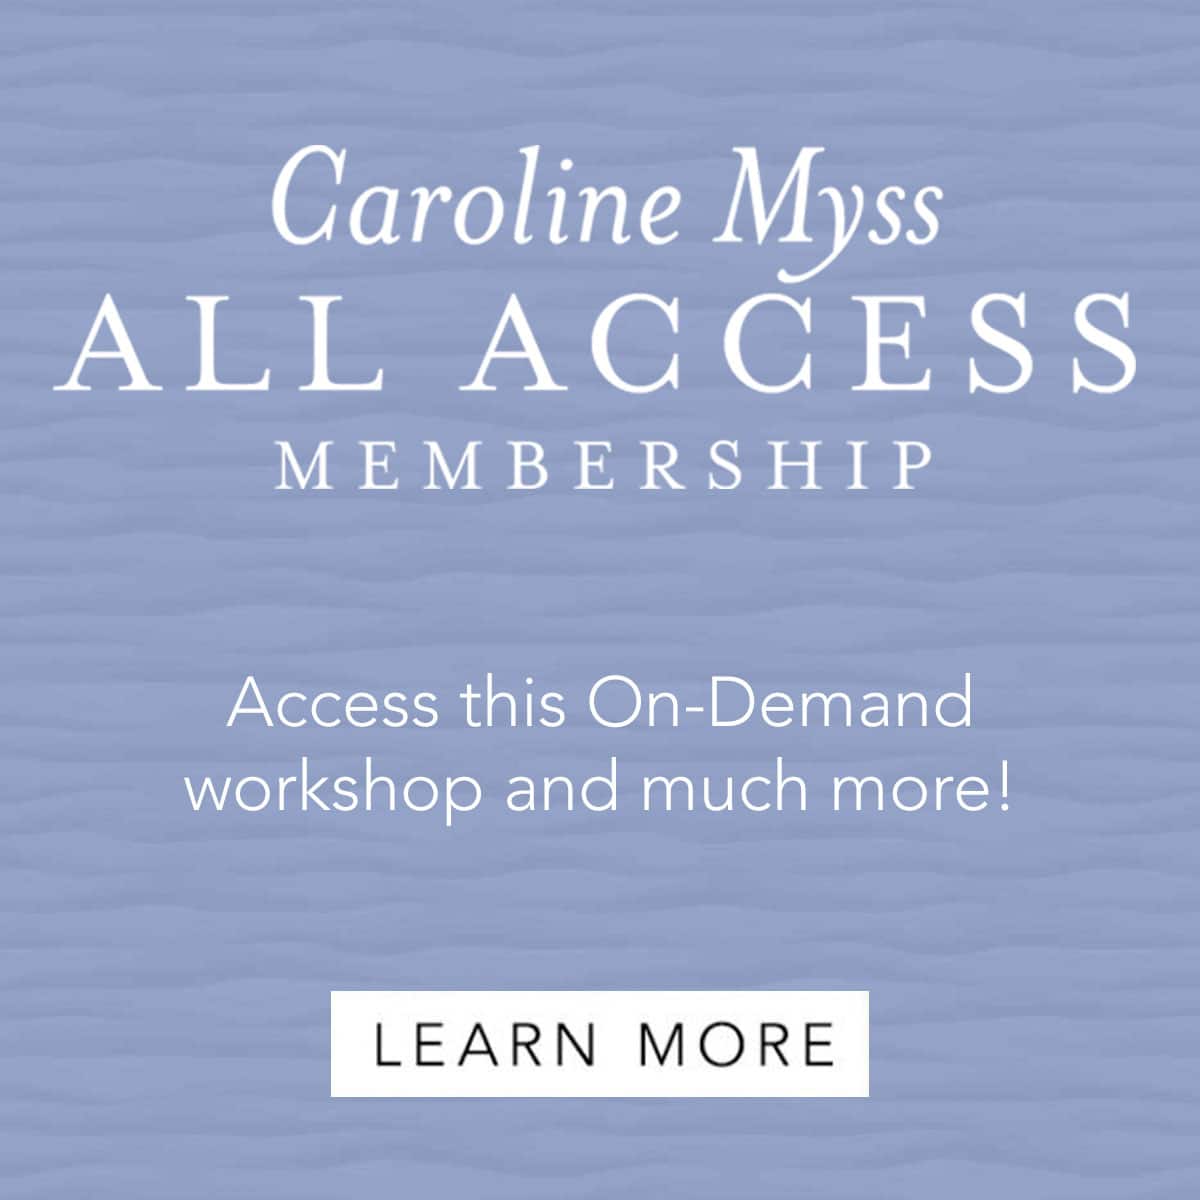 This On Demand Workshop is included with Caroline Myss All Access!